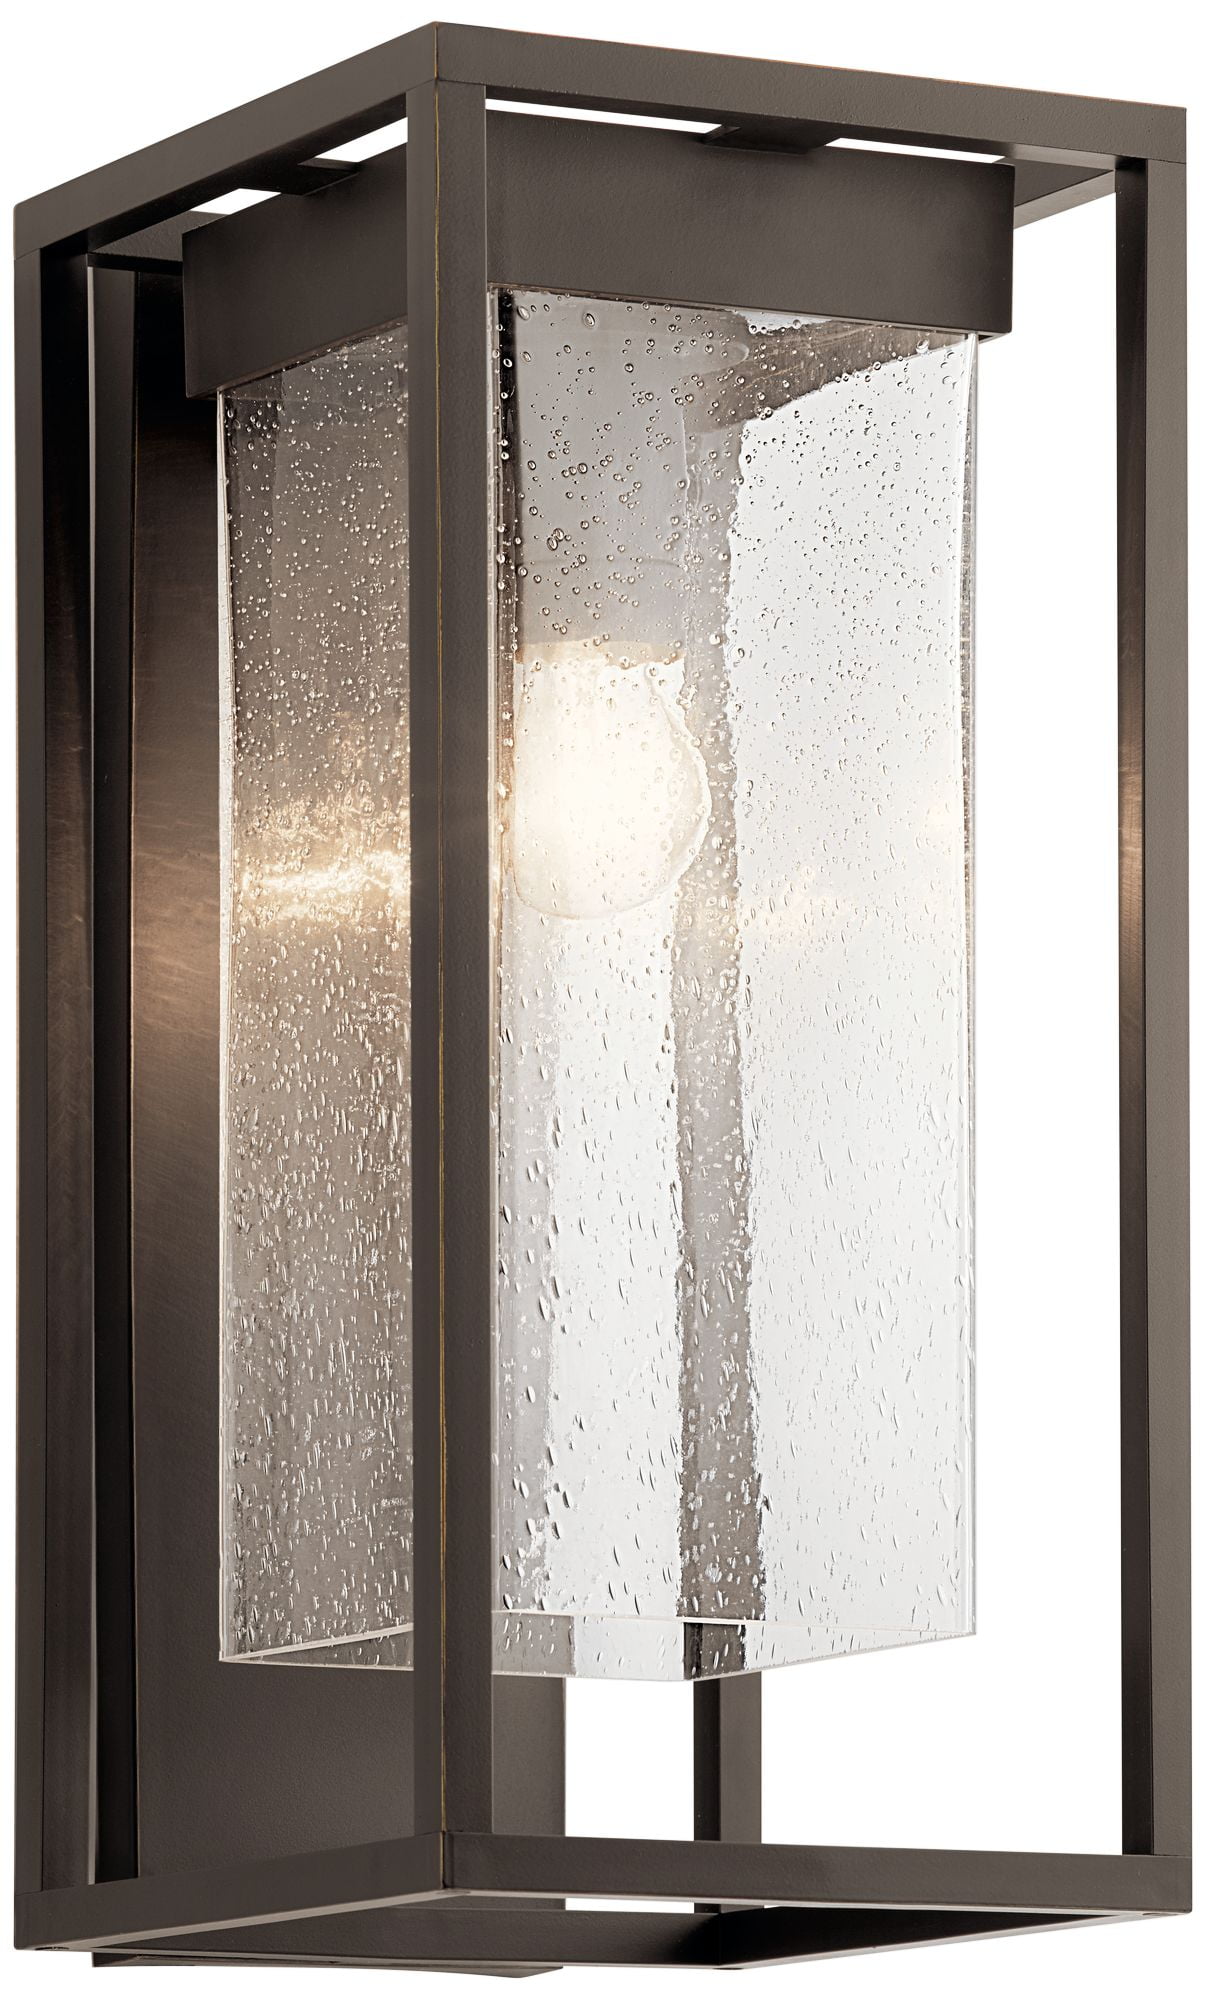 Kichler 59024 Barras 20" Tall Outdoor Wall Sconce Black 